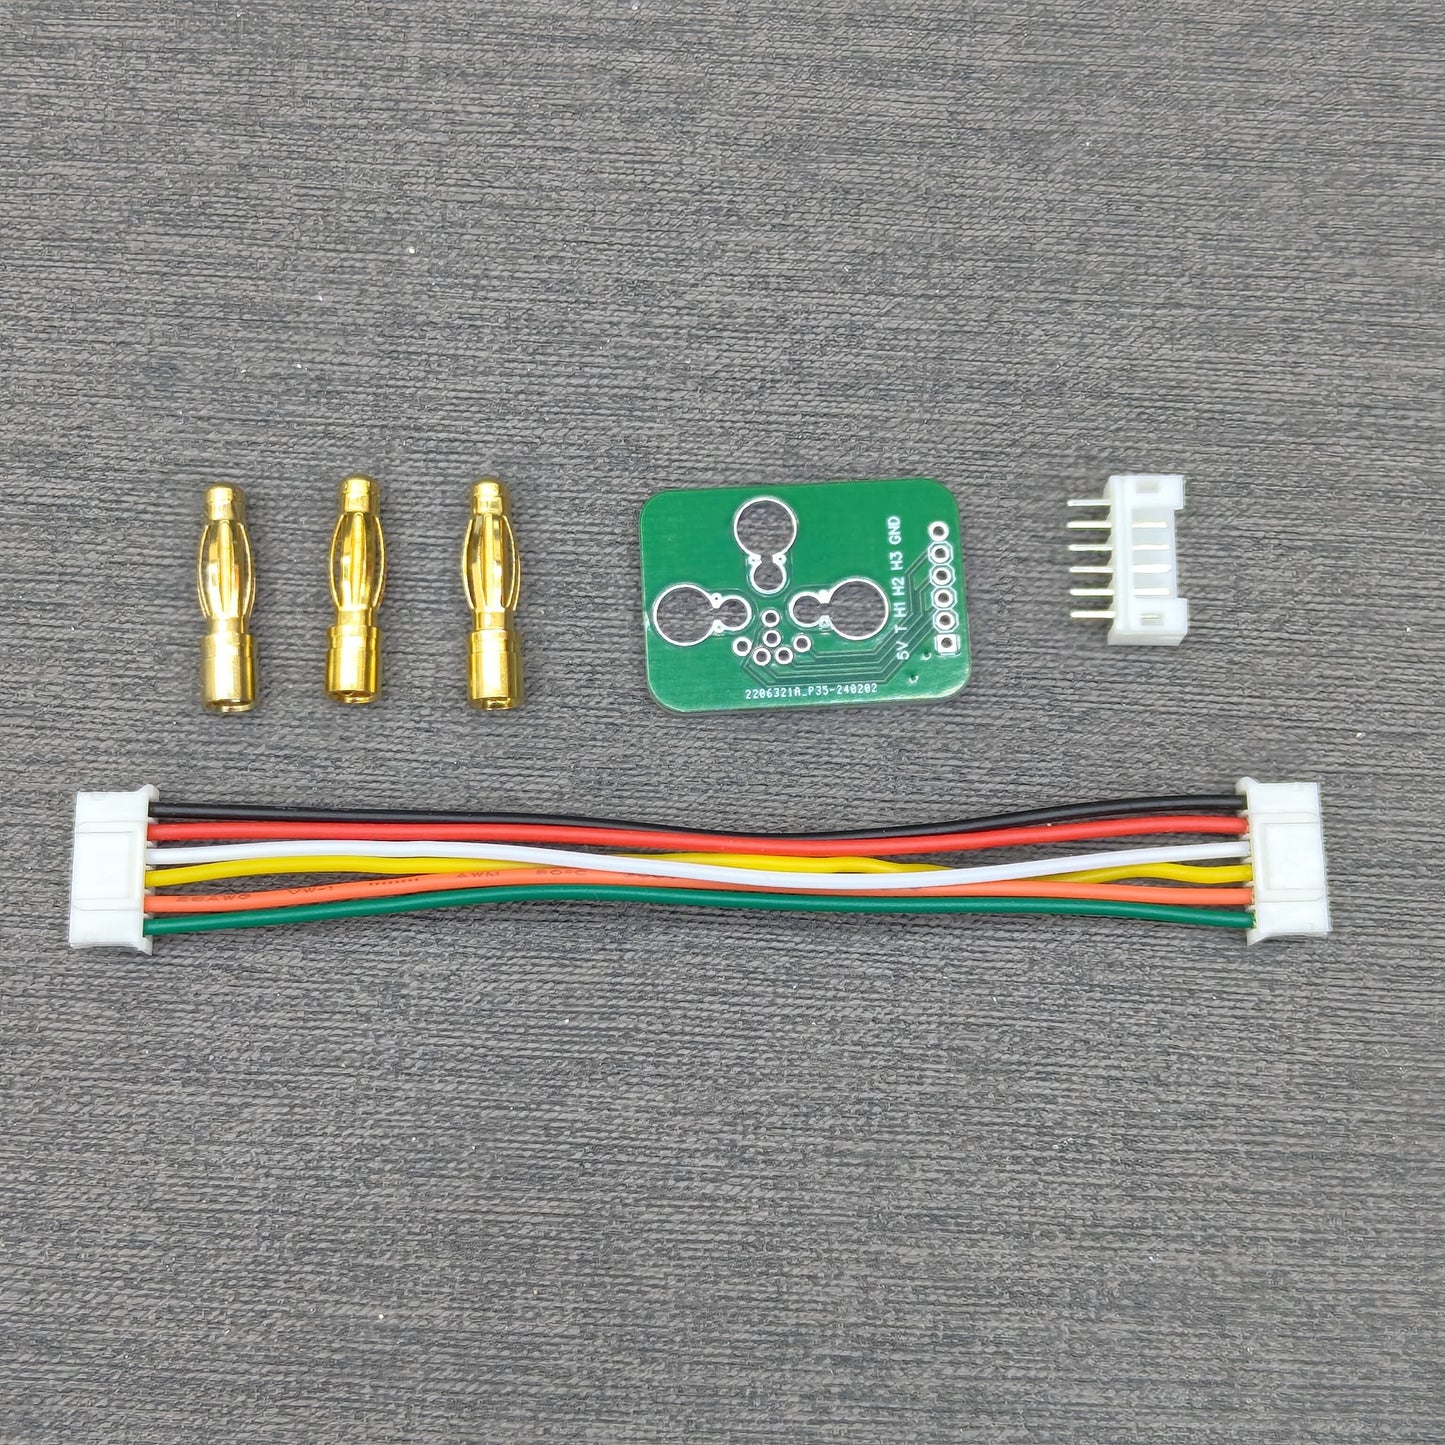 GT/Pint Motor connector PCB